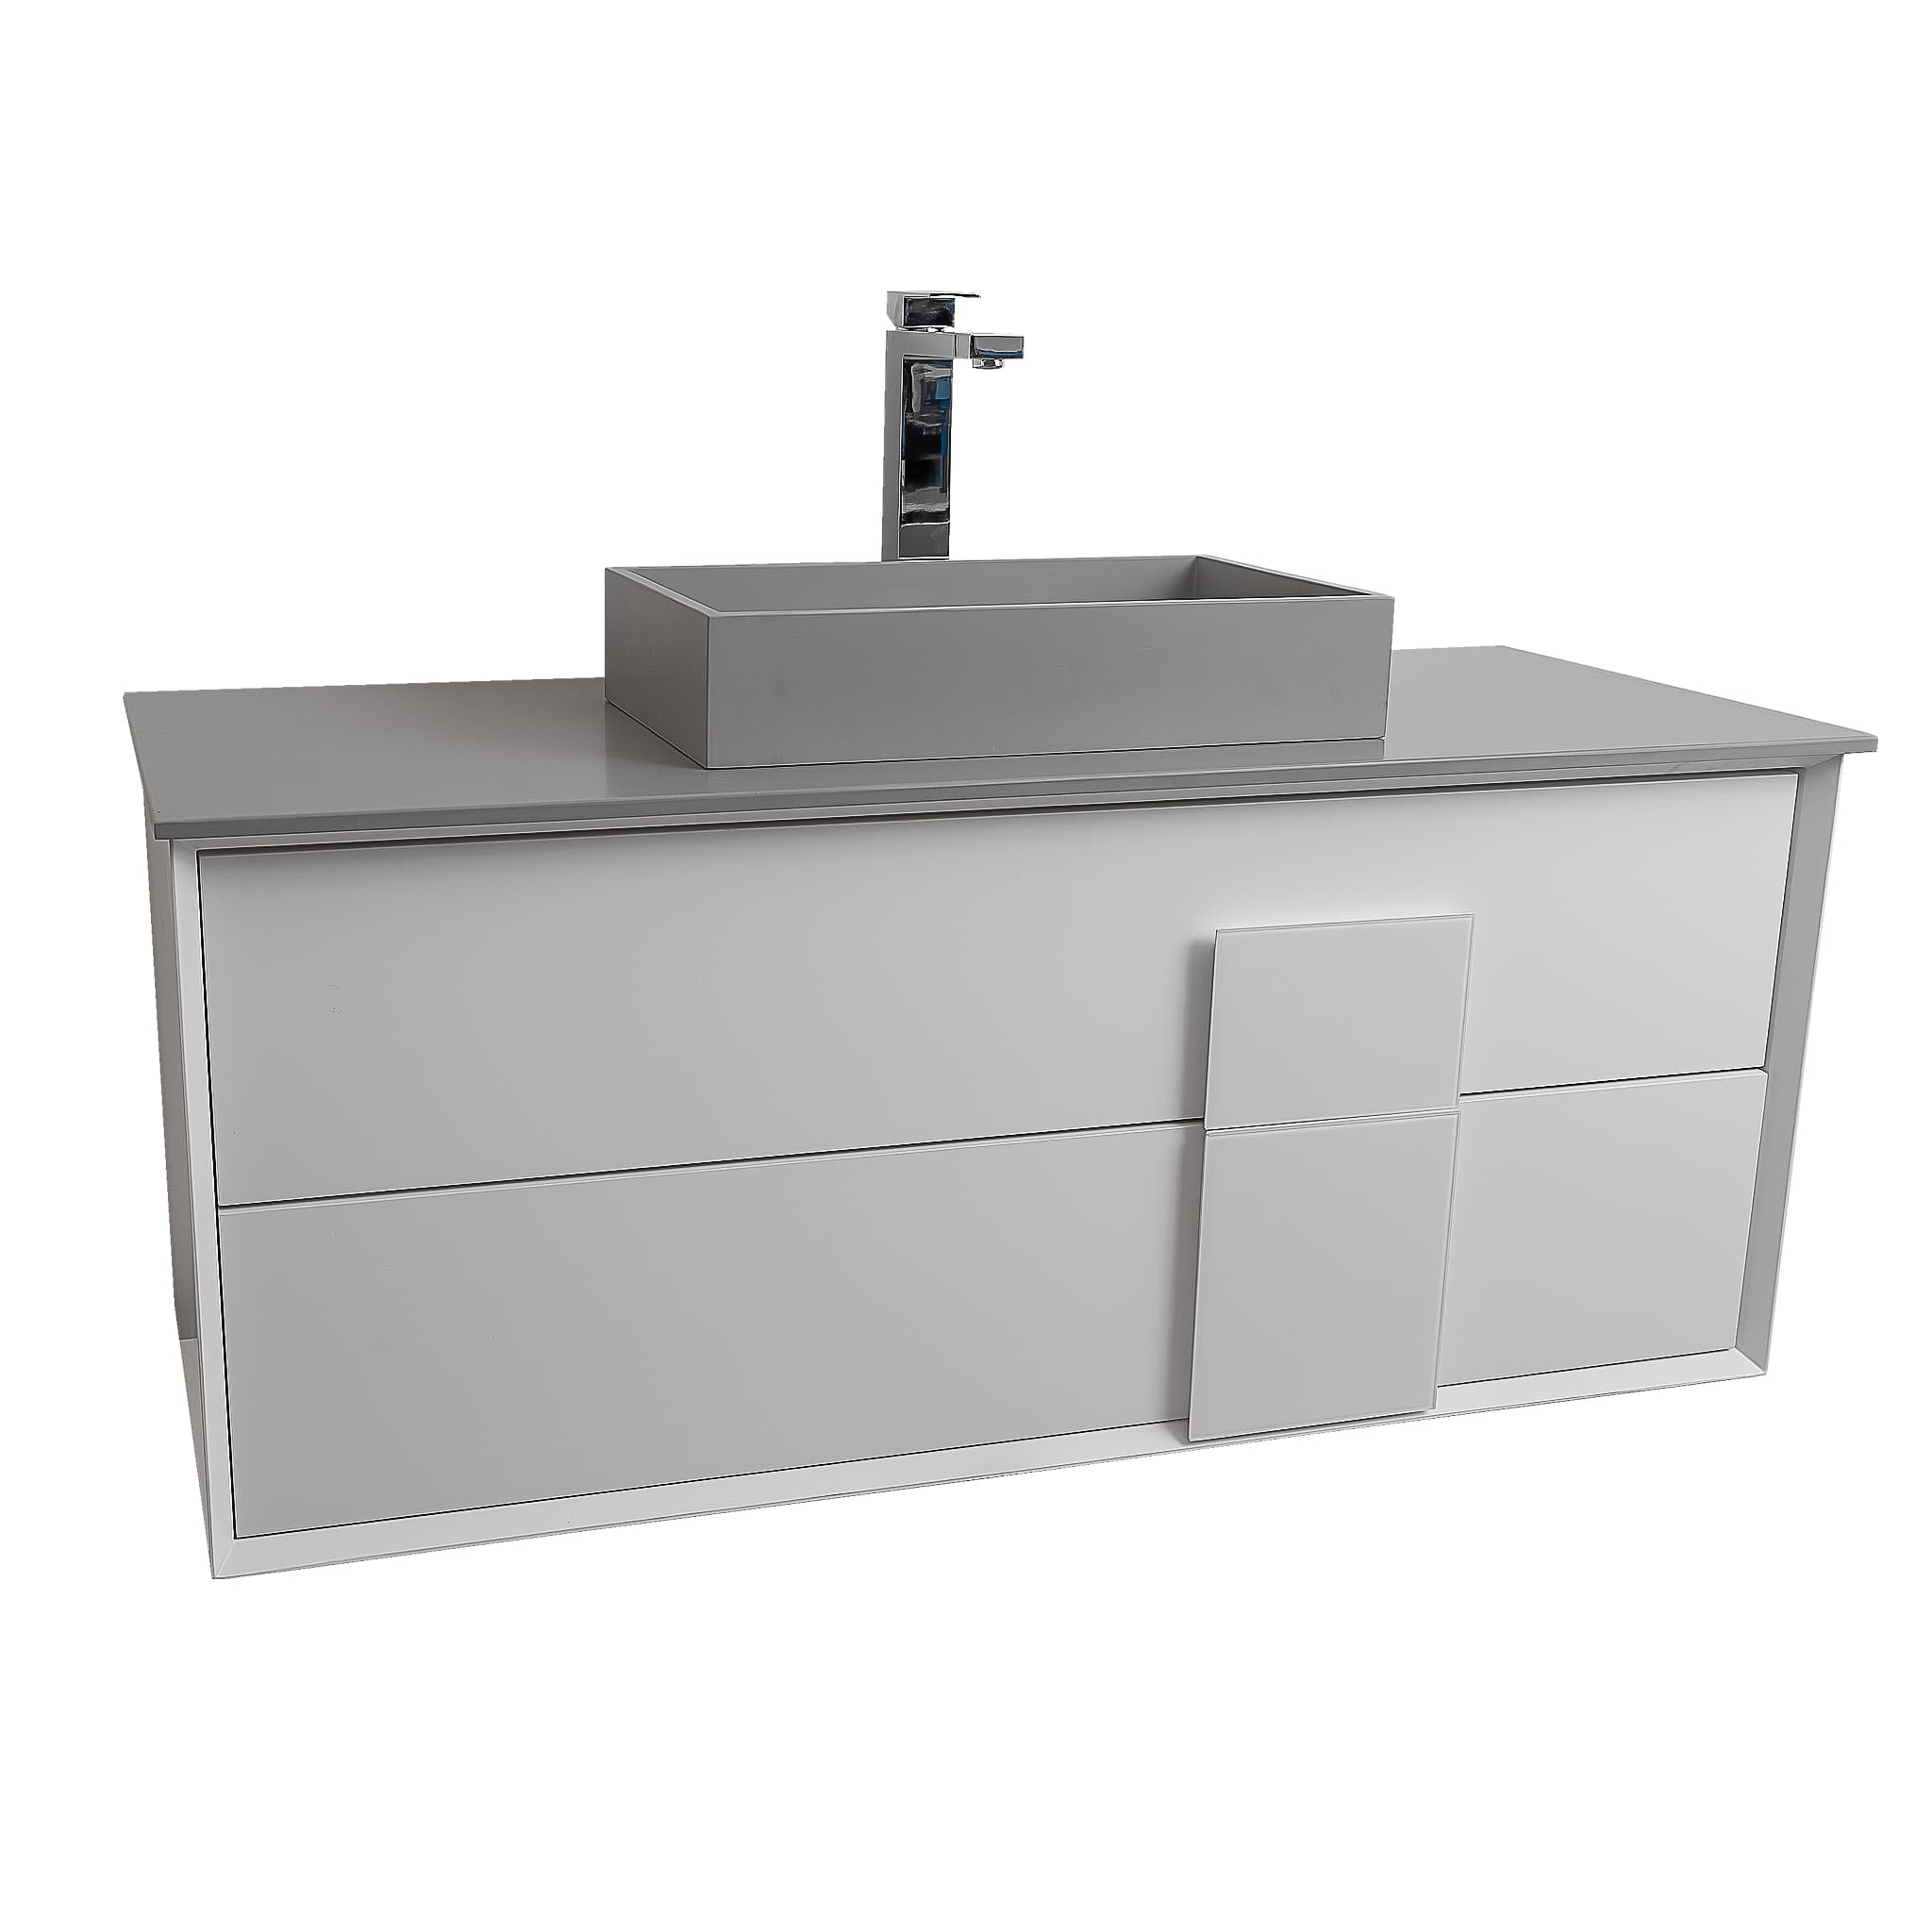 Piazza 47.5 Matte White With White Handle Cabinet, Solid Surface Flat Grey Counter and Infinity Square Solid Surface Grey Basin 1329, Wall Mounted Modern Vanity Set